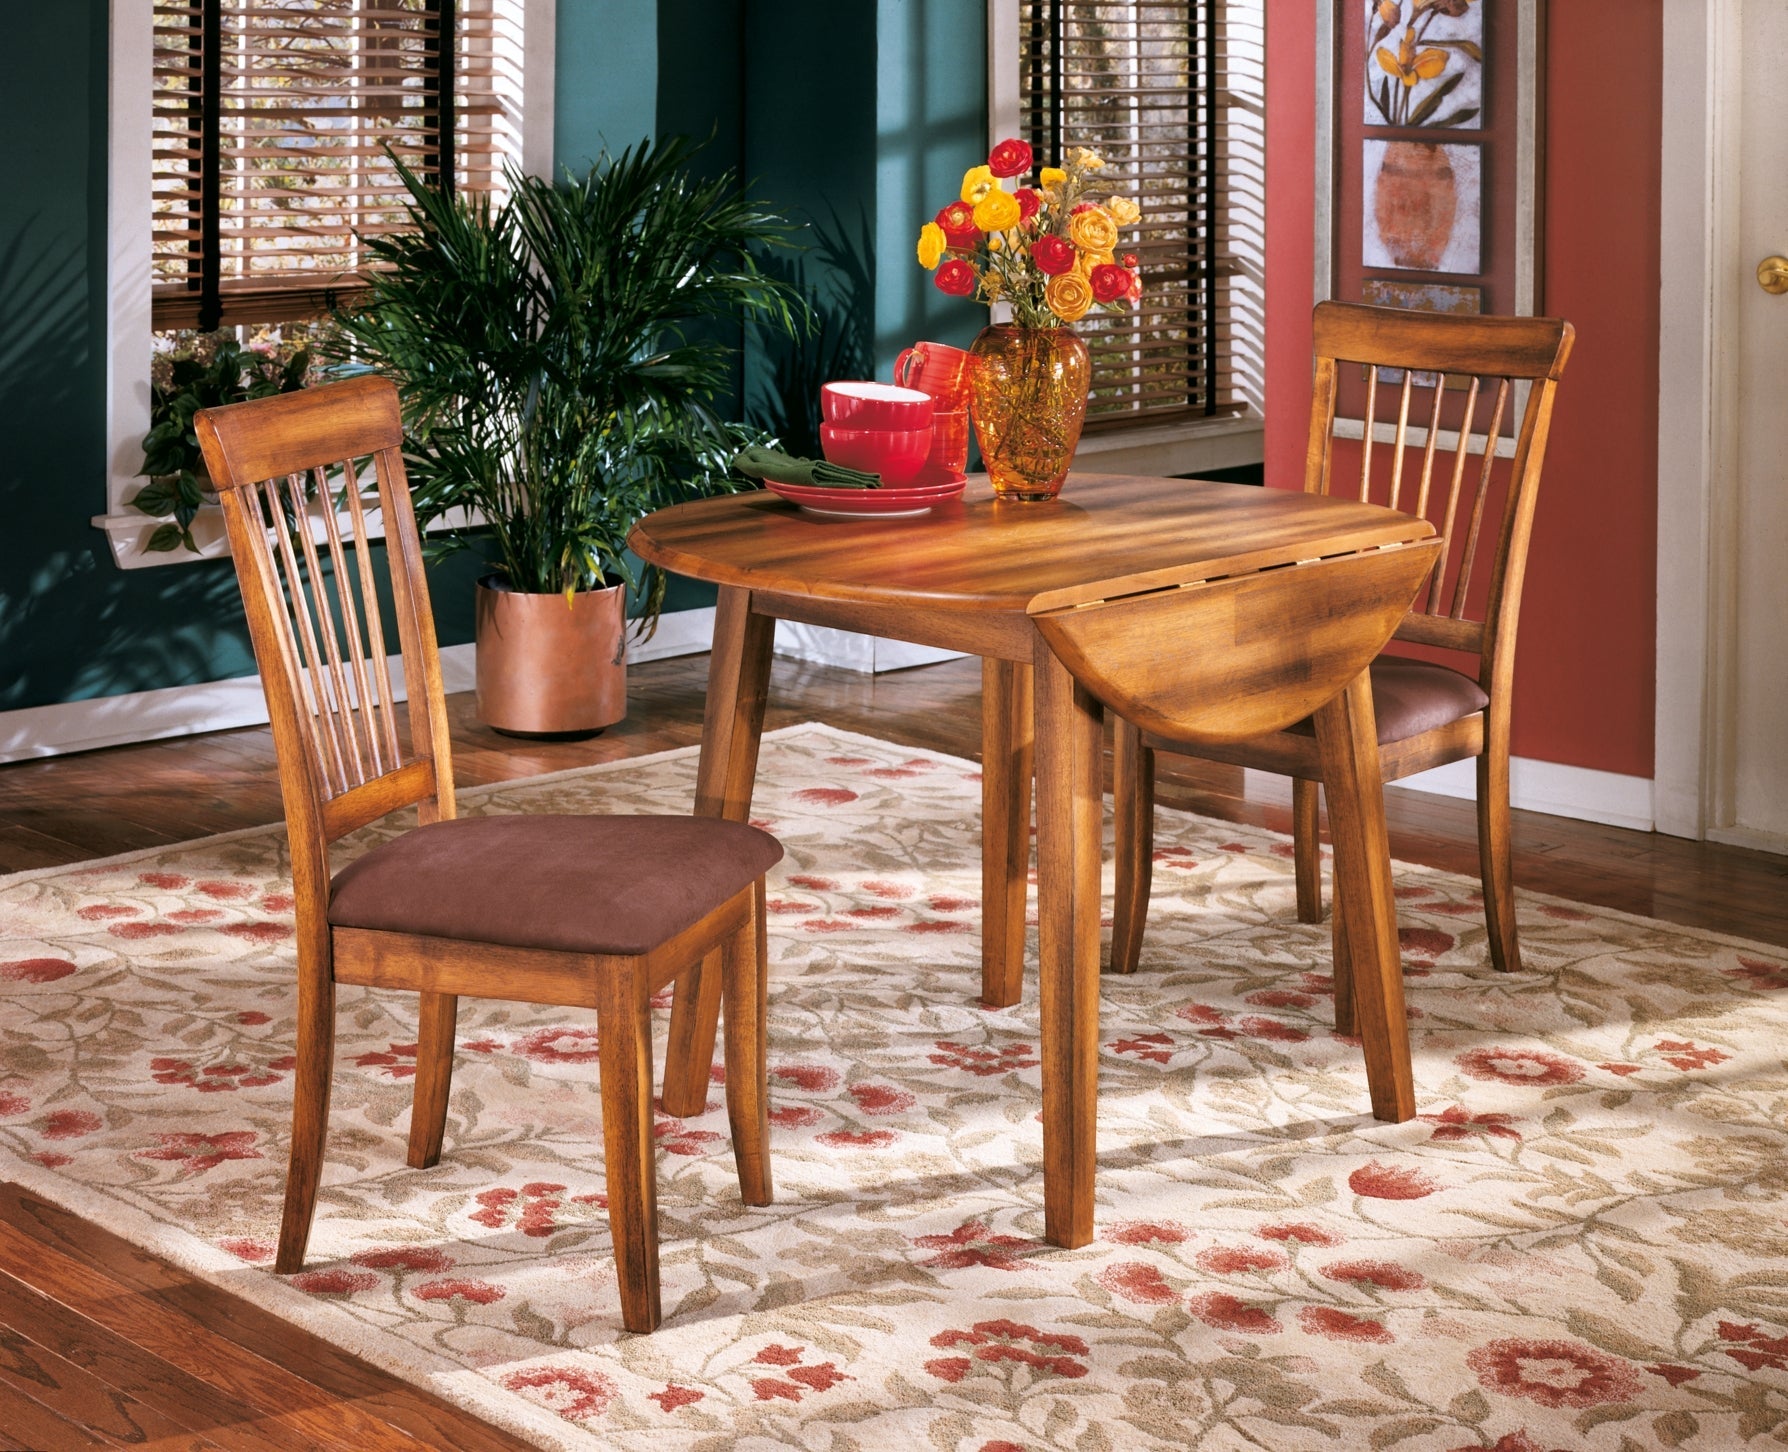 Berringer Dining Table and 2 Chairs at Walker Mattress and Furniture Locations in Cedar Park and Belton TX.